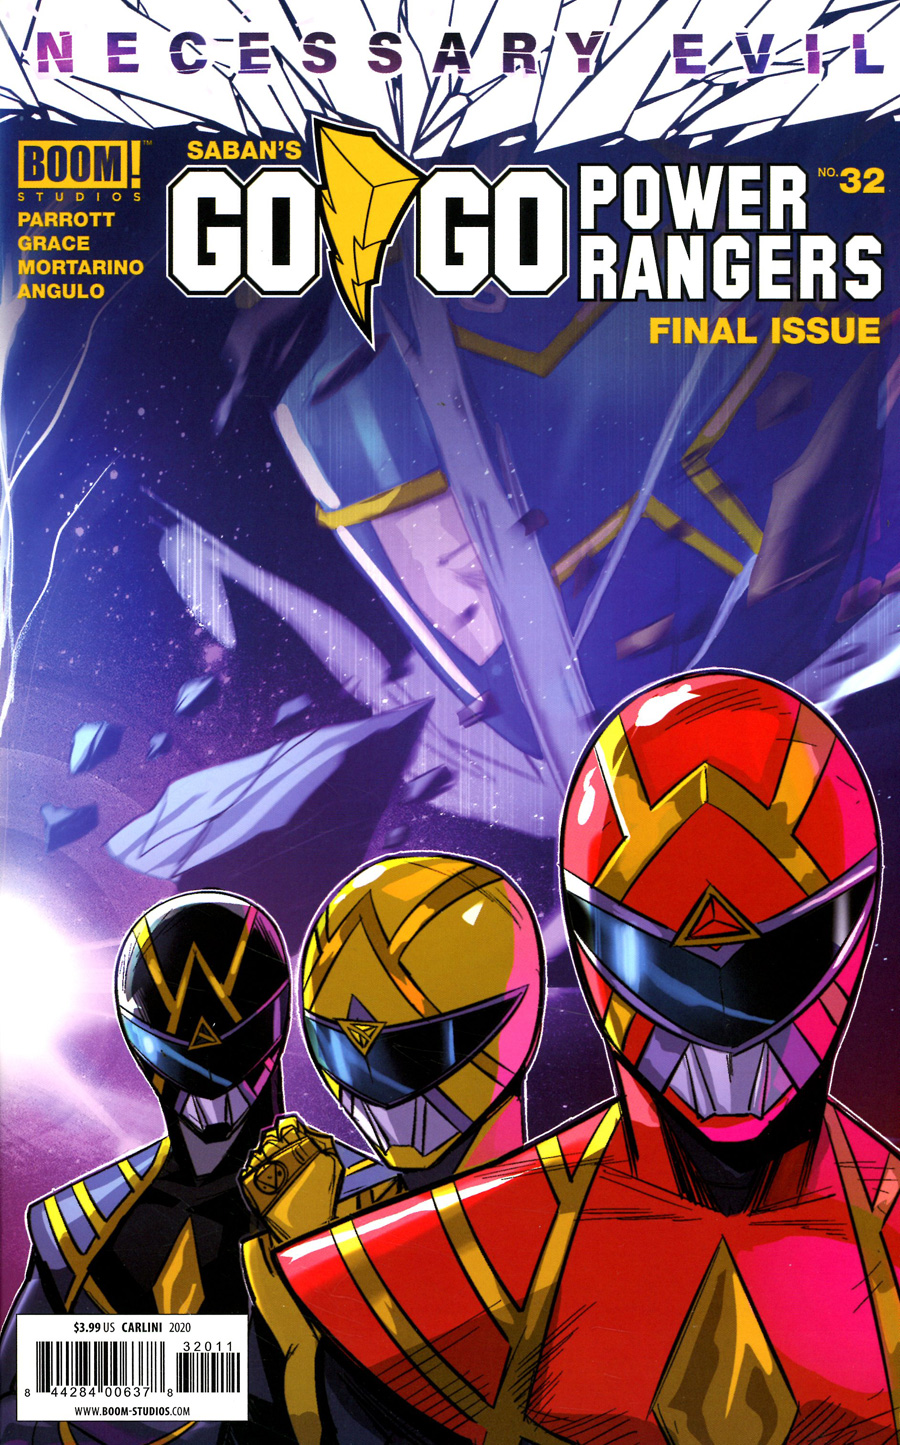 Sabans Go Go Power Rangers #32 Cover A Regular Eleonora Carlini Connecting Right Side Cover